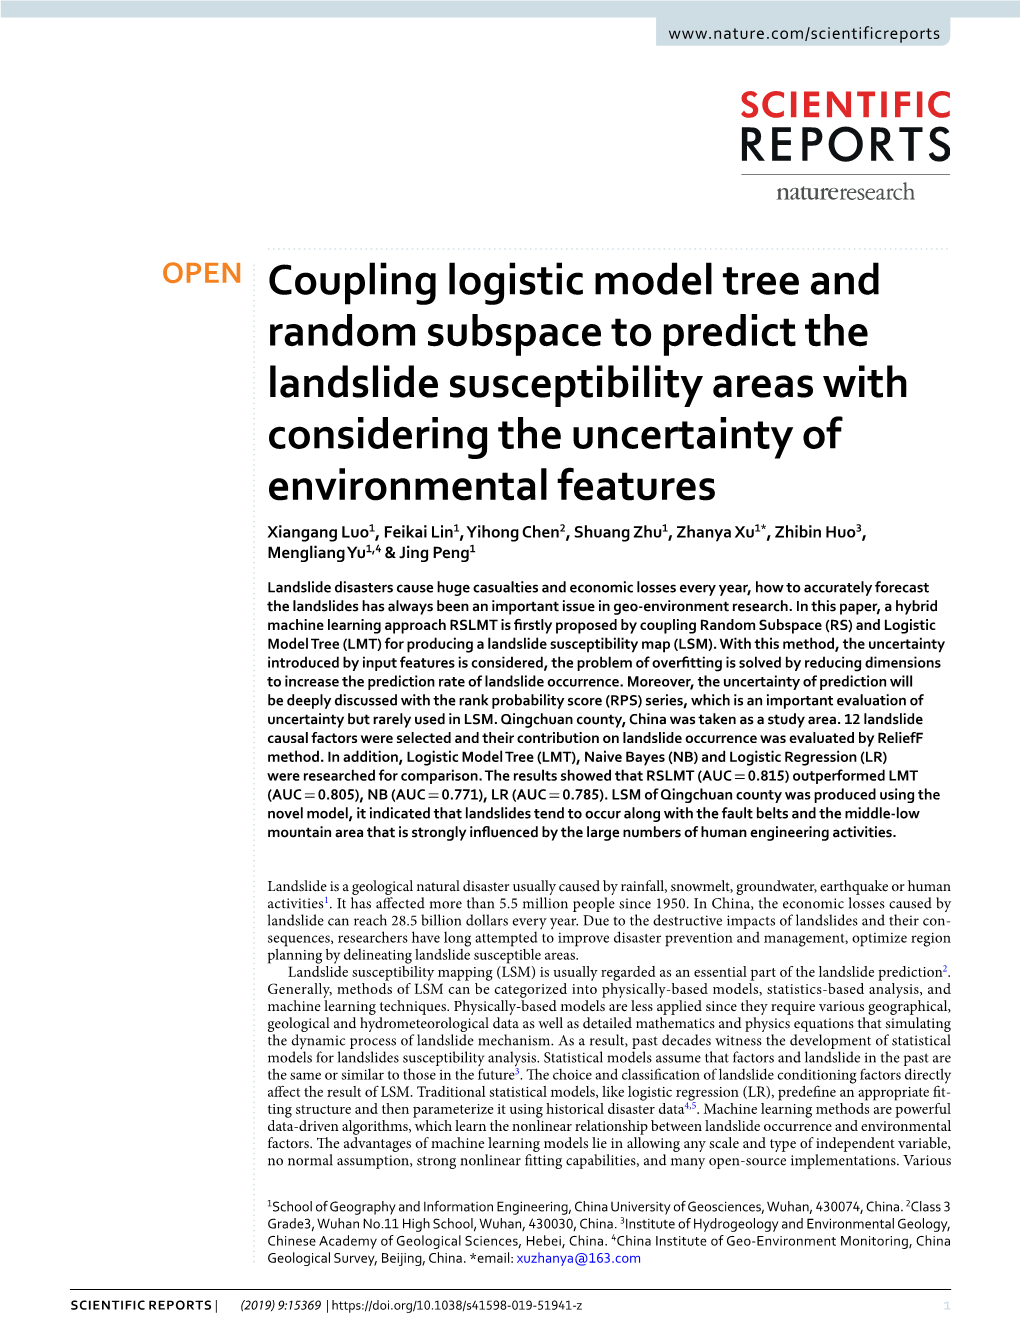 Coupling Logistic Model Tree and Random Subspace to Predict The